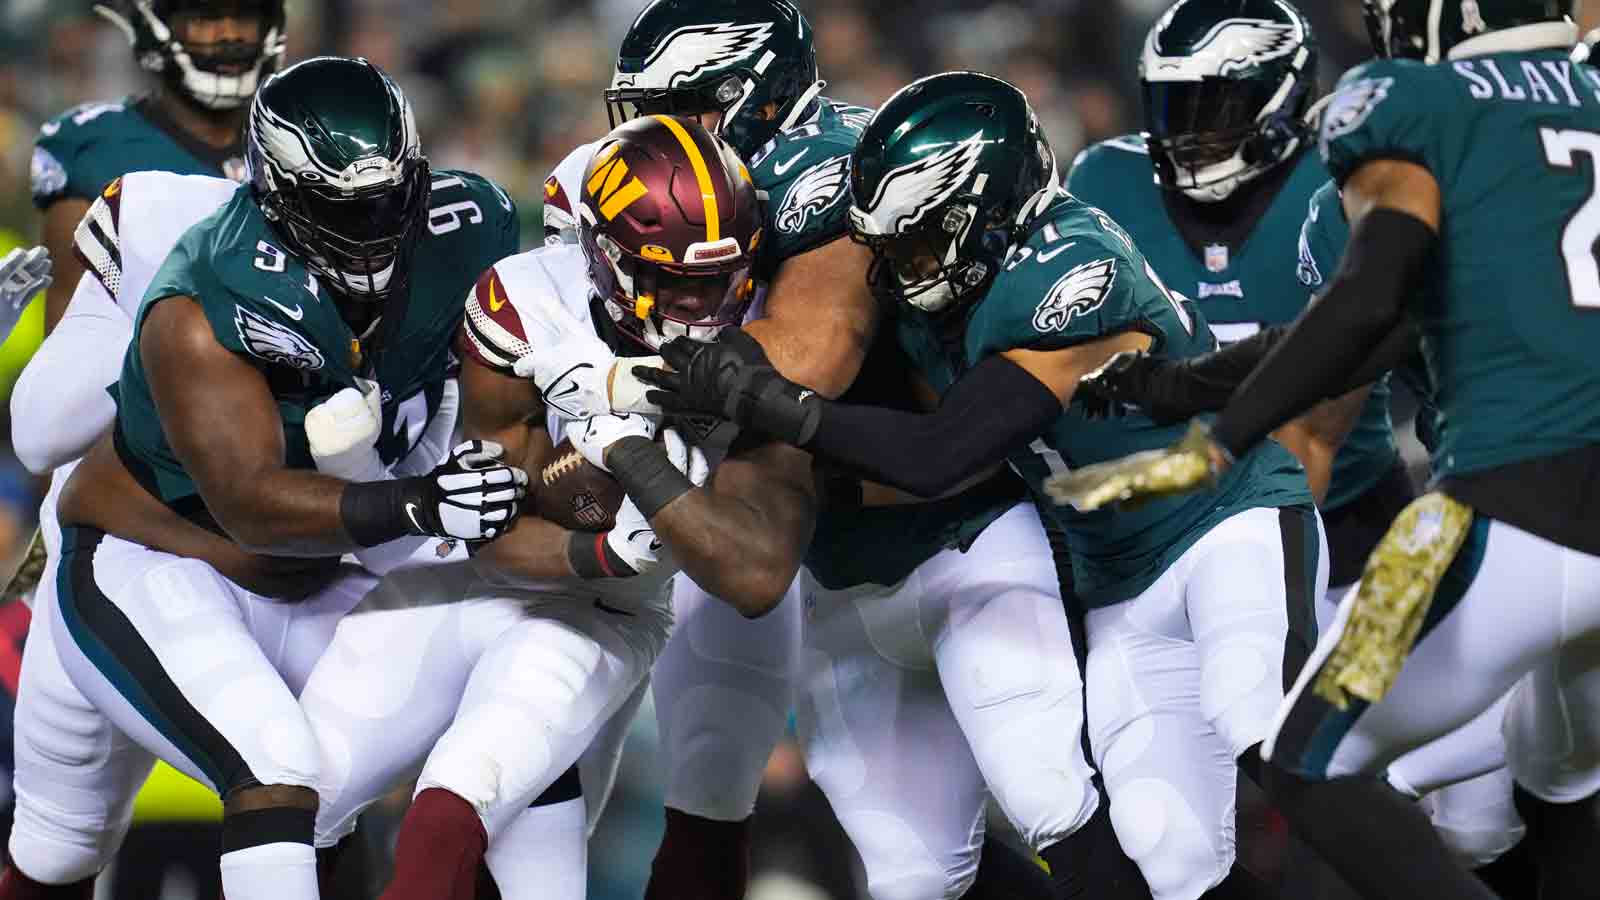 Eagles vs. Commanders live stream: How to watch NFL Week 4 game on